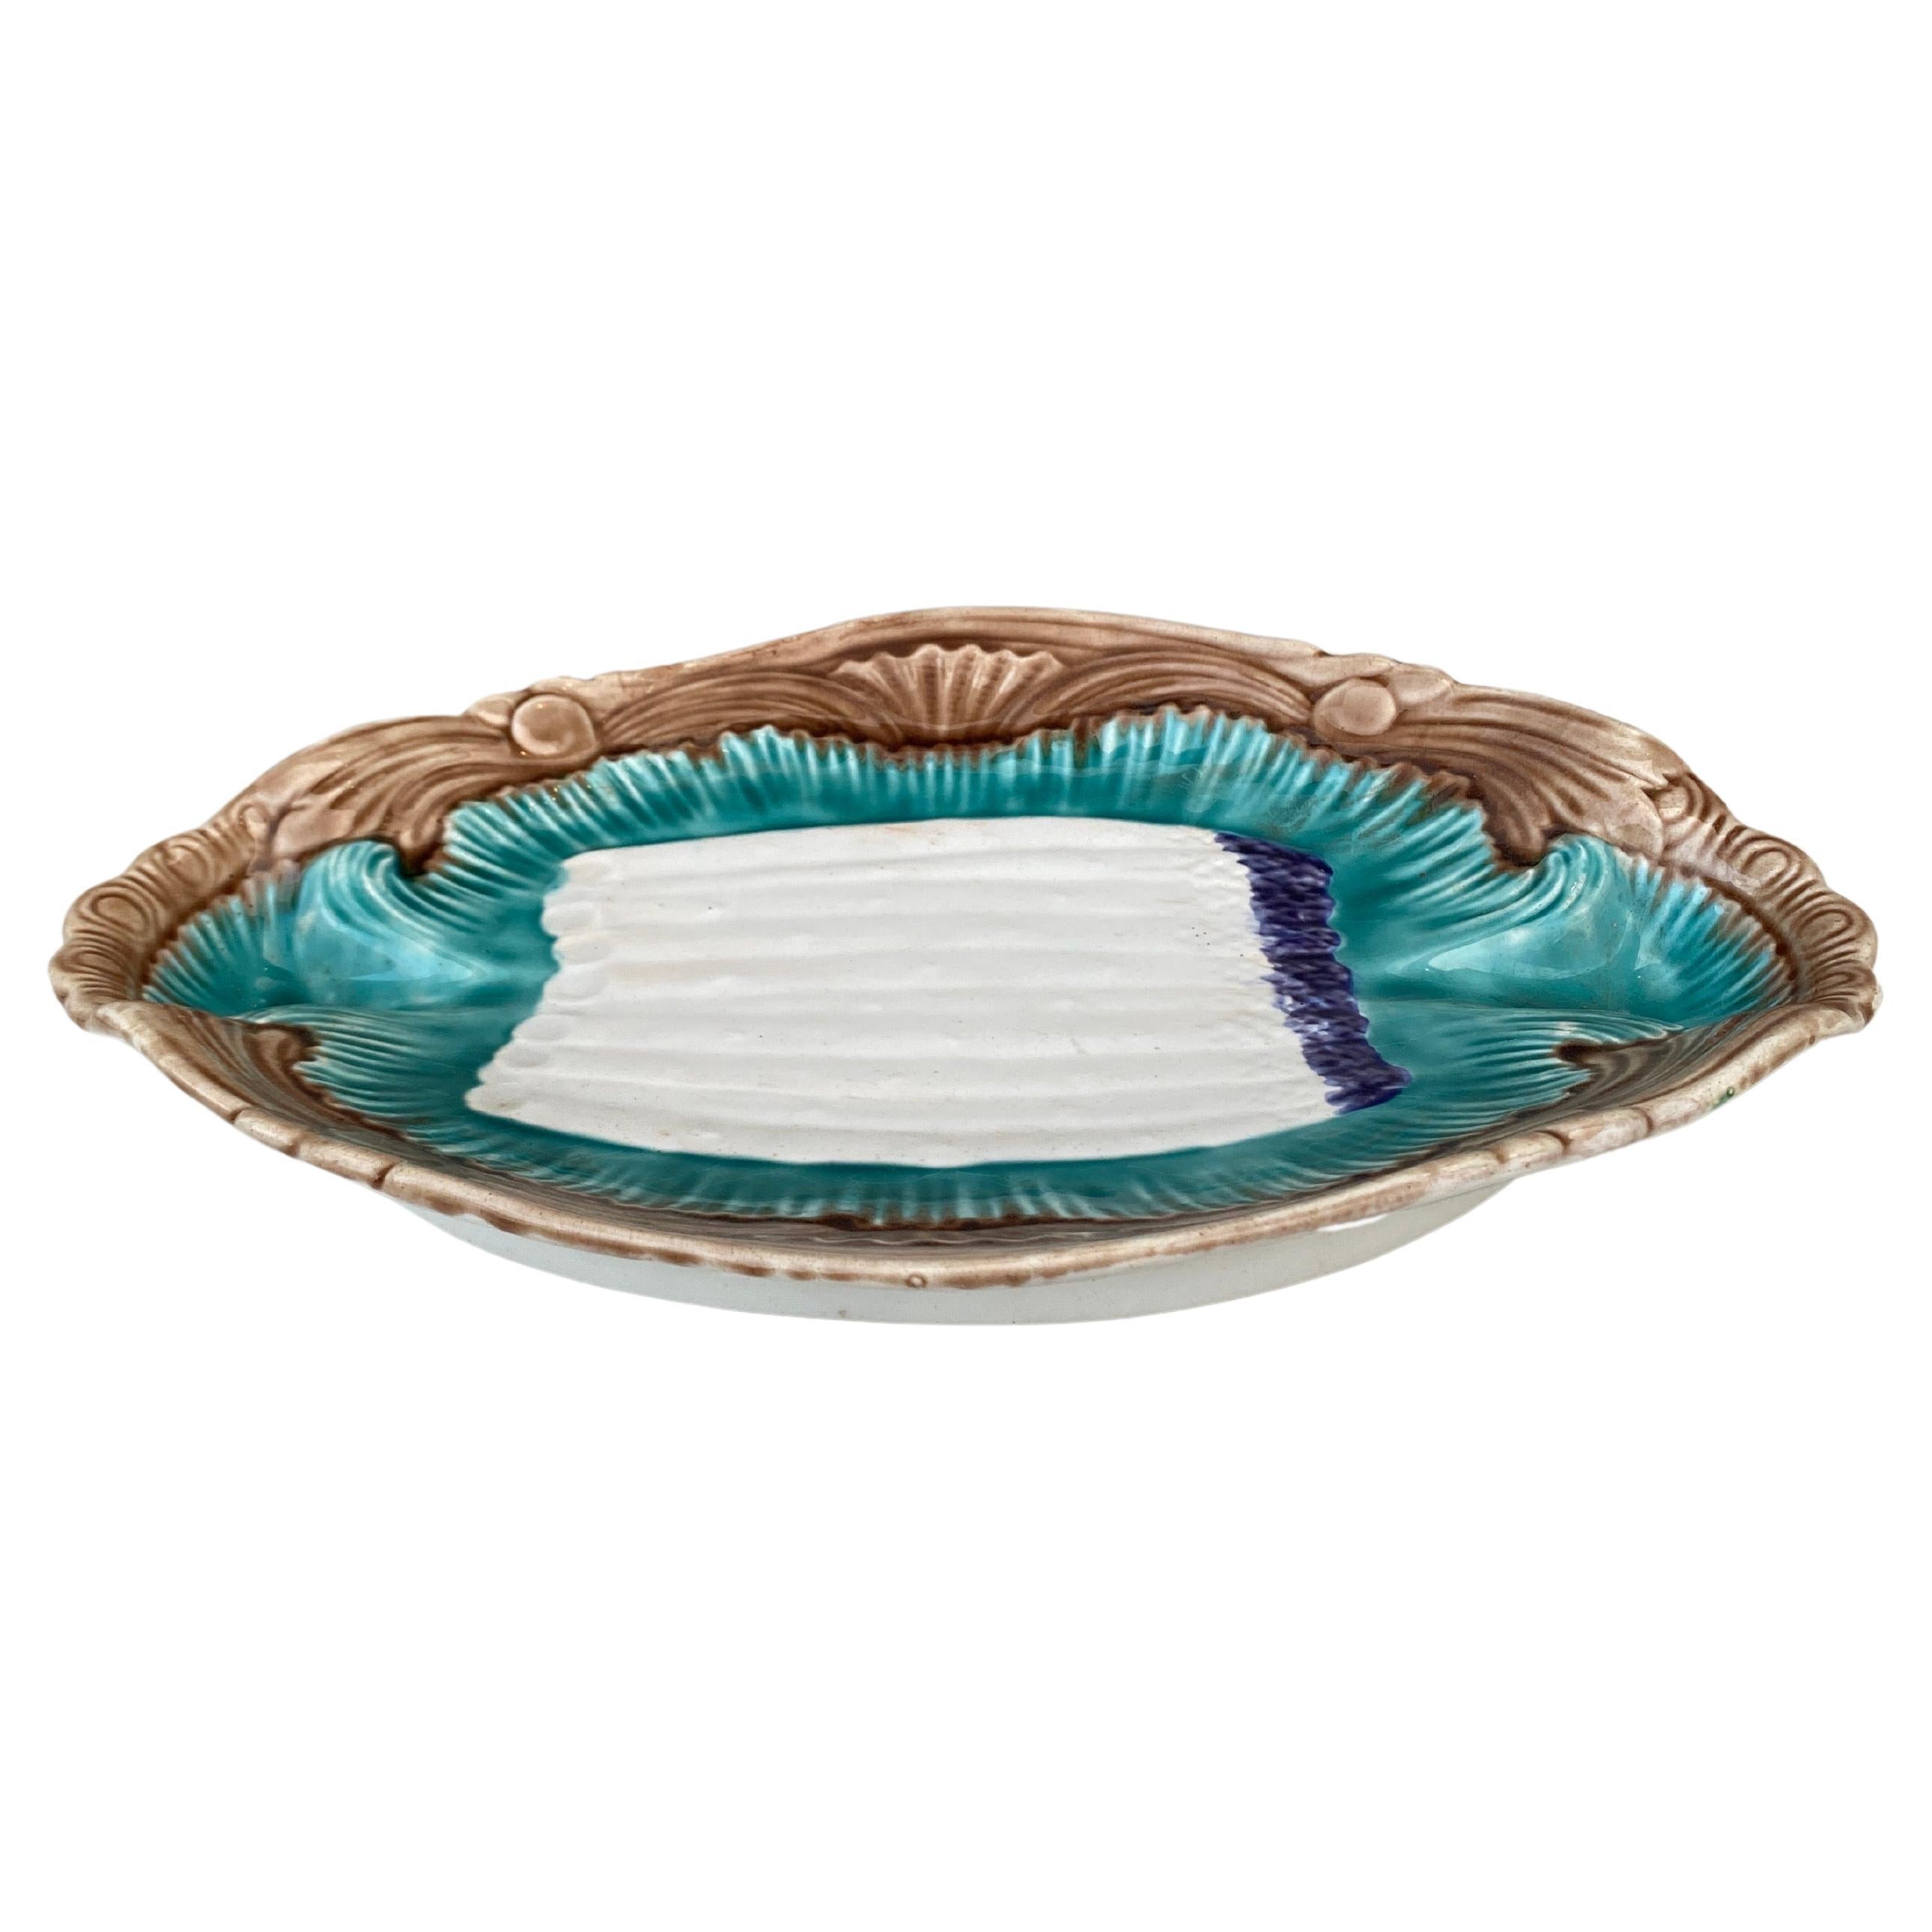 French Majolica asparagus platter signed Orchies.
(North of France), circa 1900
Every important French manufactures produced at the end of the 19th century  asparagus and artichoke sets.
  